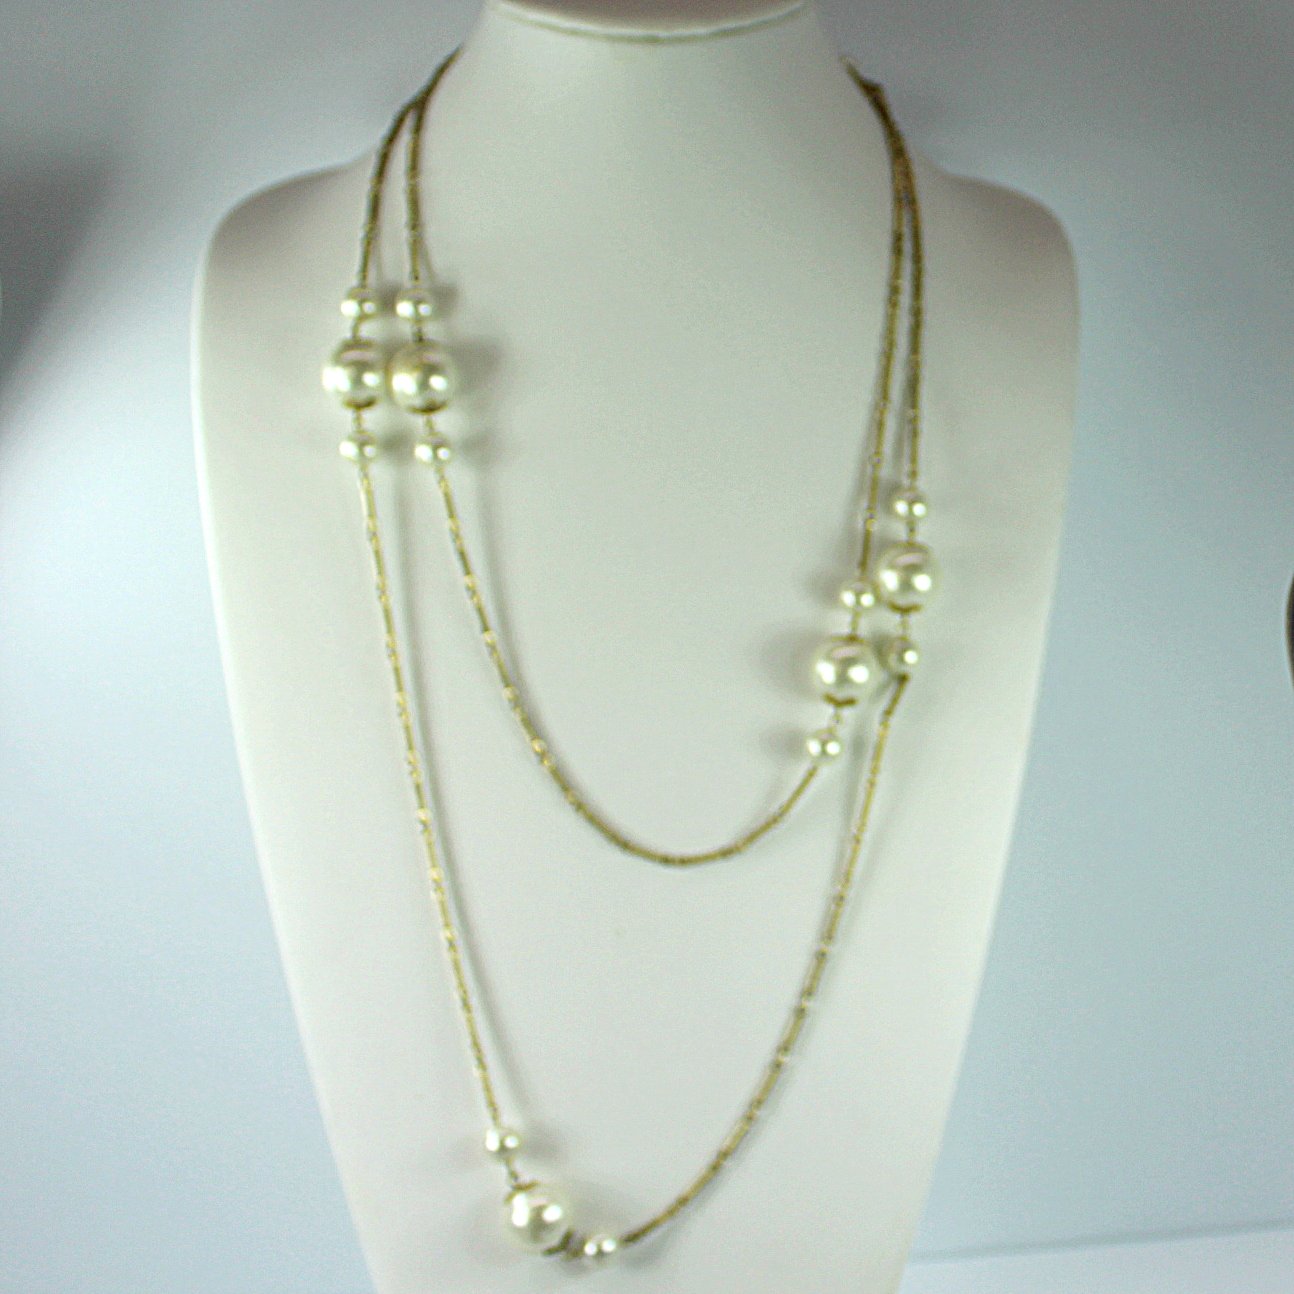 Coro 60" Long Vintage Necklace Pearls Gold Tone Chain Links full view whole chain